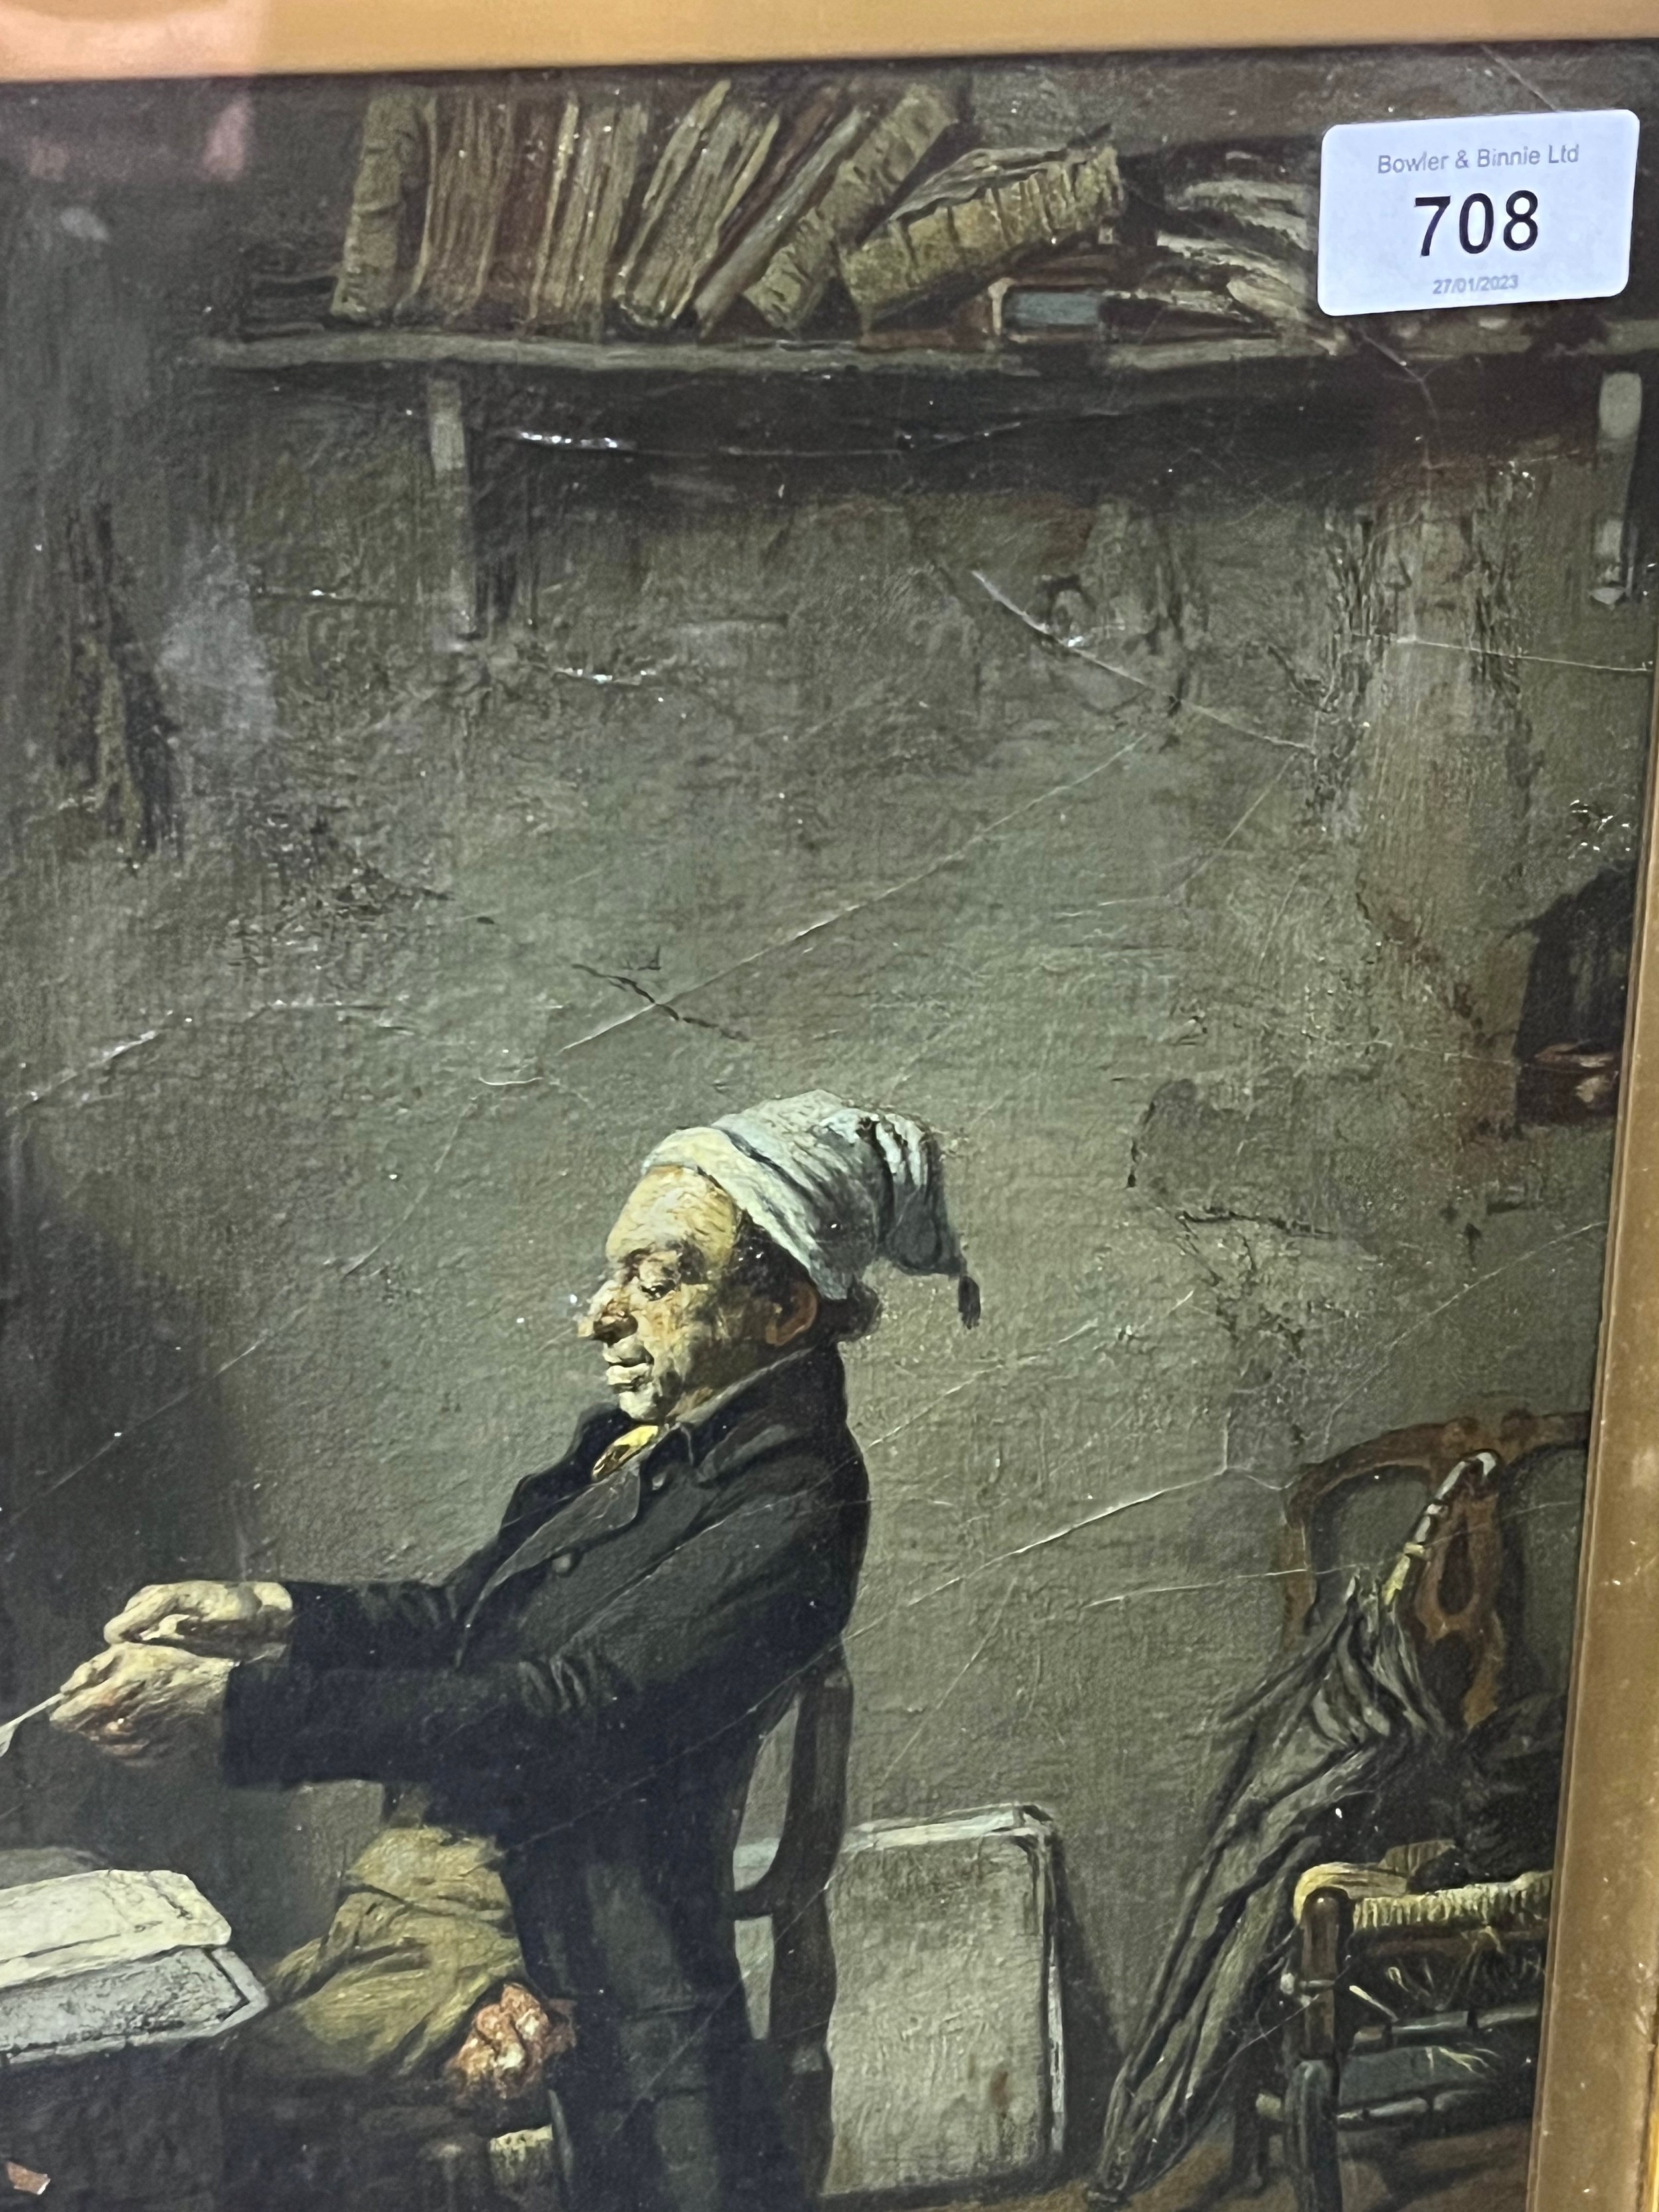 18th/ 19th century painting on canvas depicting a man seated at desk with eerie back drop wall - Image 4 of 6